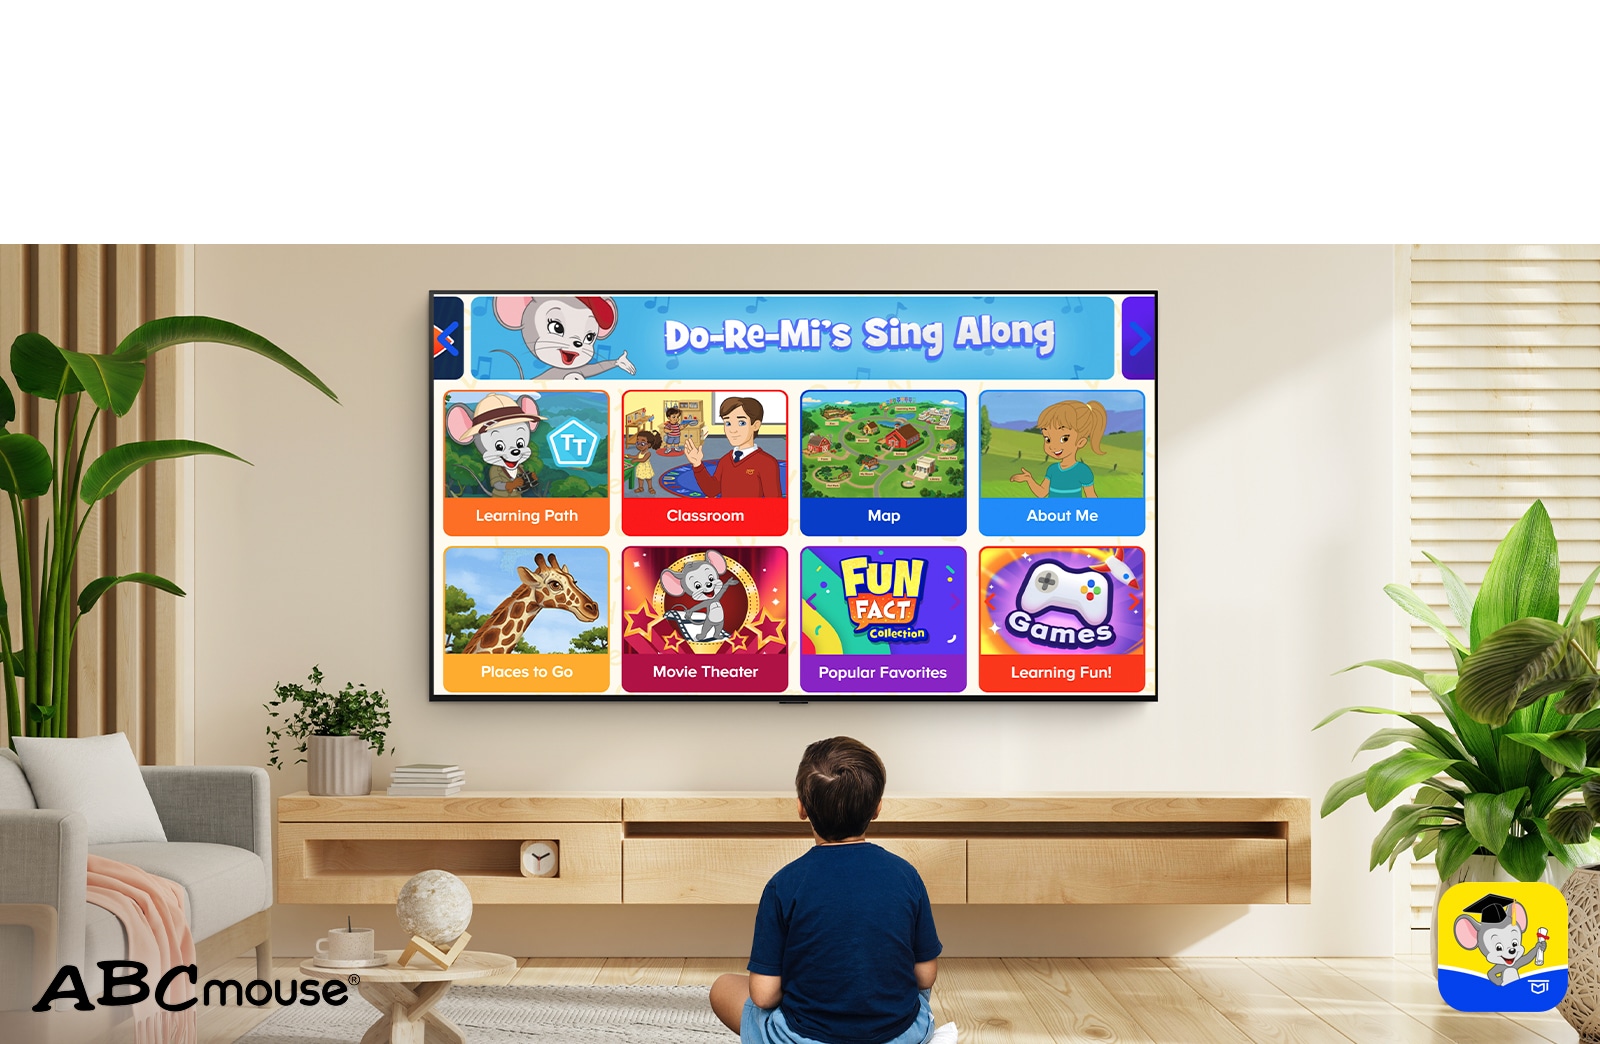 A little boy sits on the floor and watches educational content on ABCmouse.